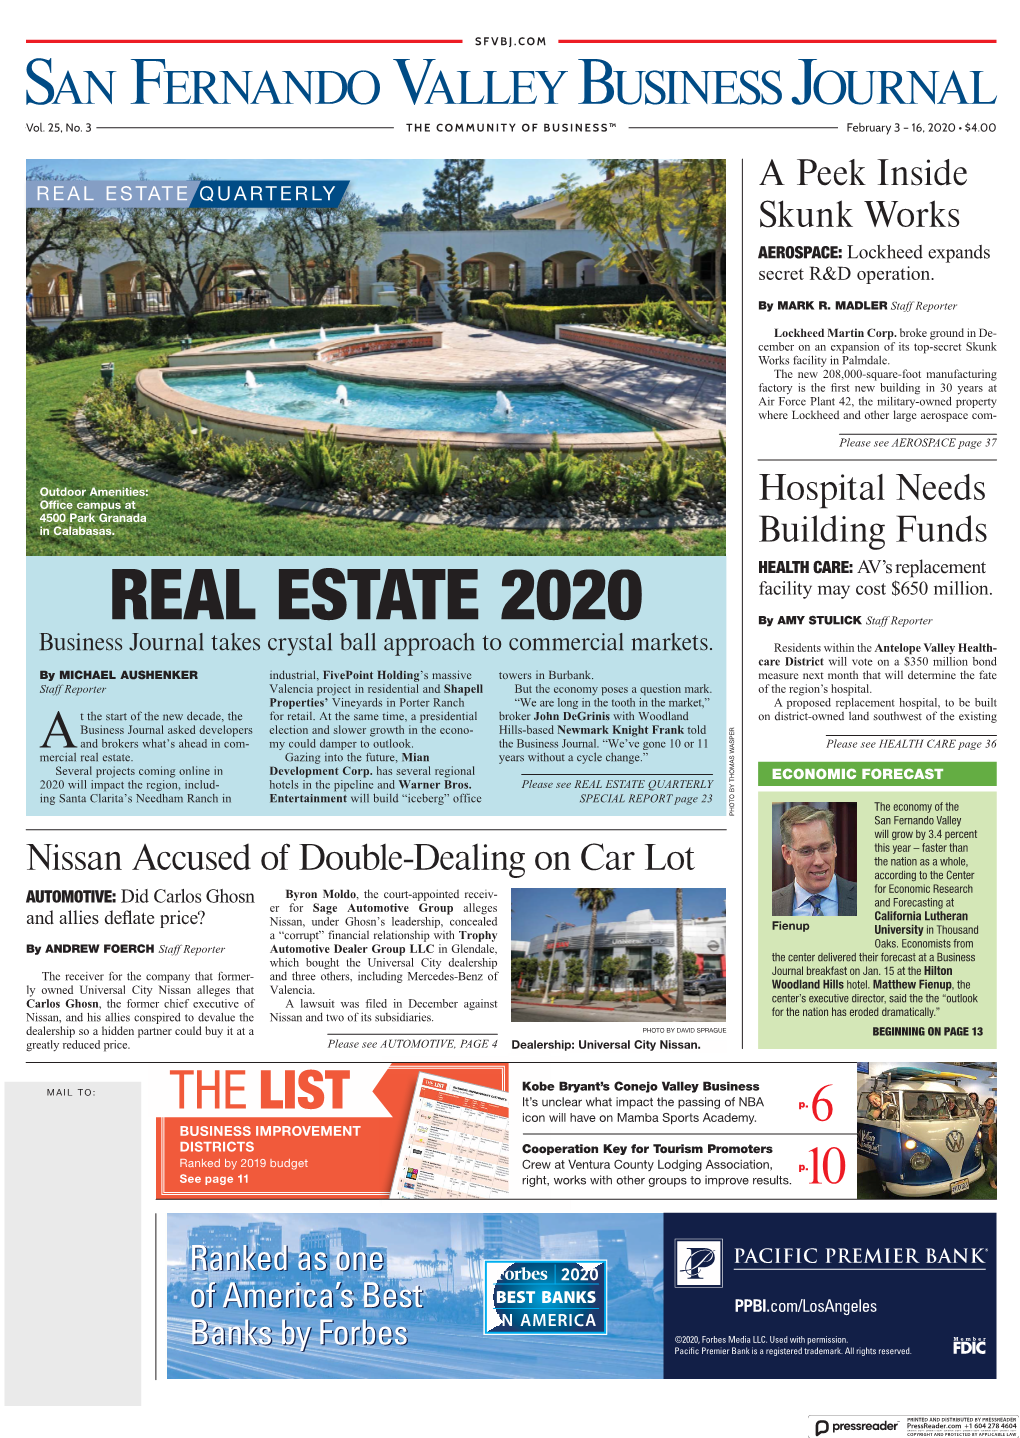 REAL ESTATE 2020 Facility May Cost $650 Million